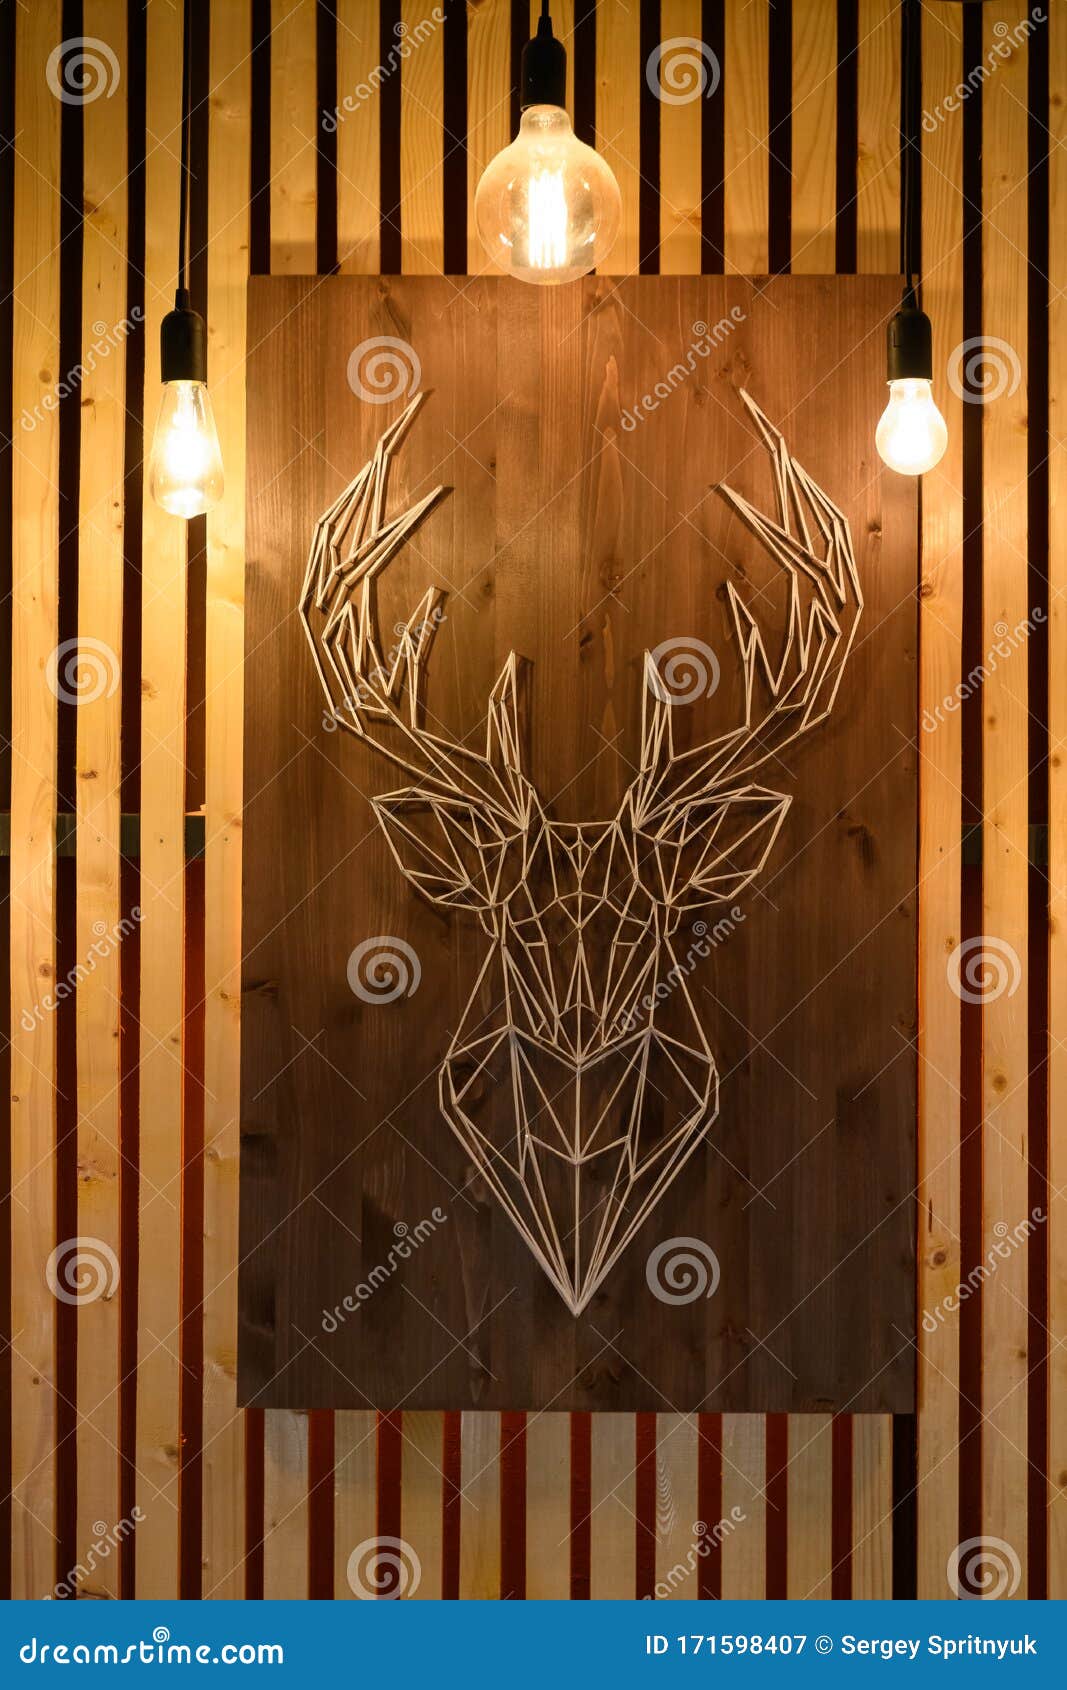 String Art. Handmade Boards. Image Of A Deer Head Made Of Thread And Nails  Stock Image - Image Of Panel, Table: 171598407